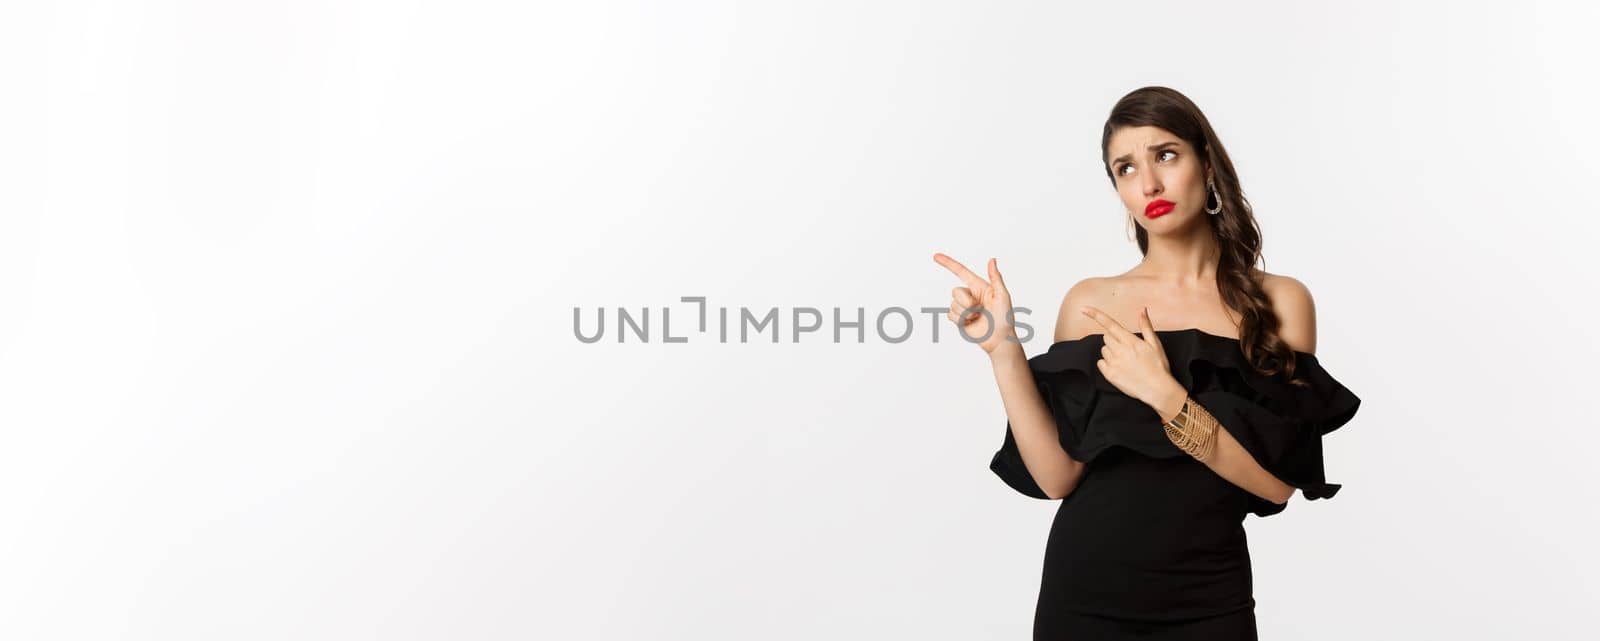 Fashion and beauty. Jealous glamour woman in black dress looking and pointing fingers left, sulking disappointed, white background.